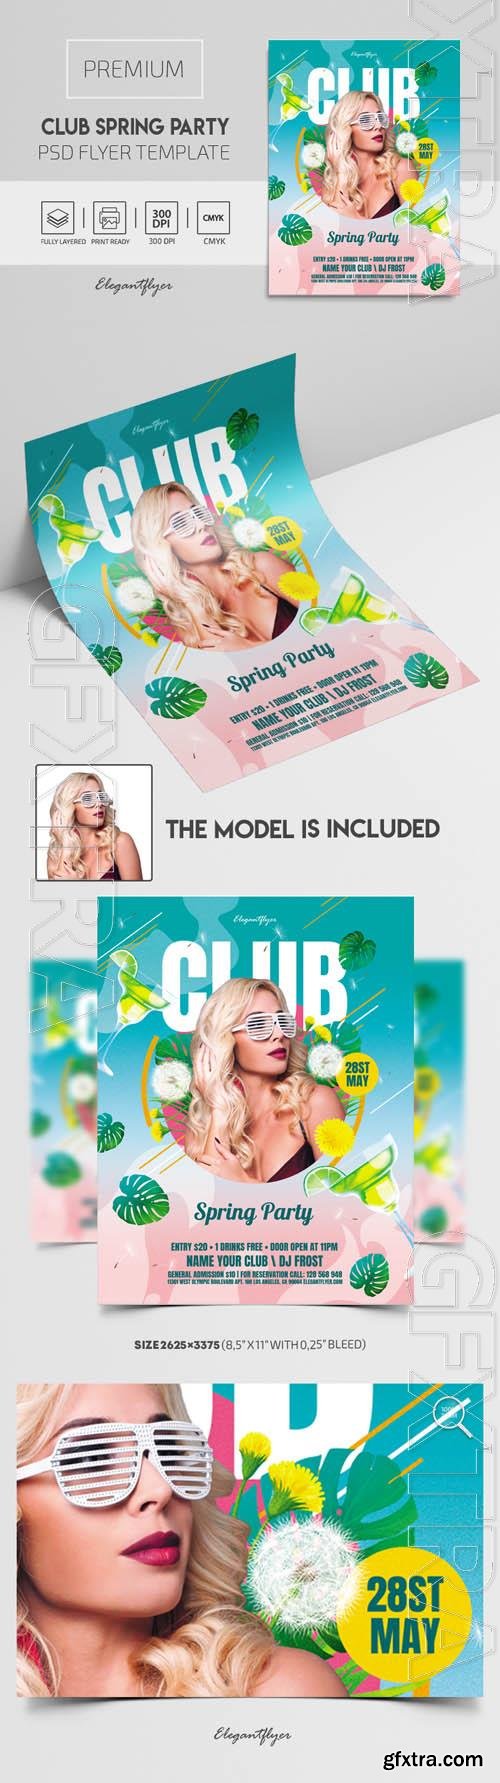 Club Spring Party Flyer PSD Template